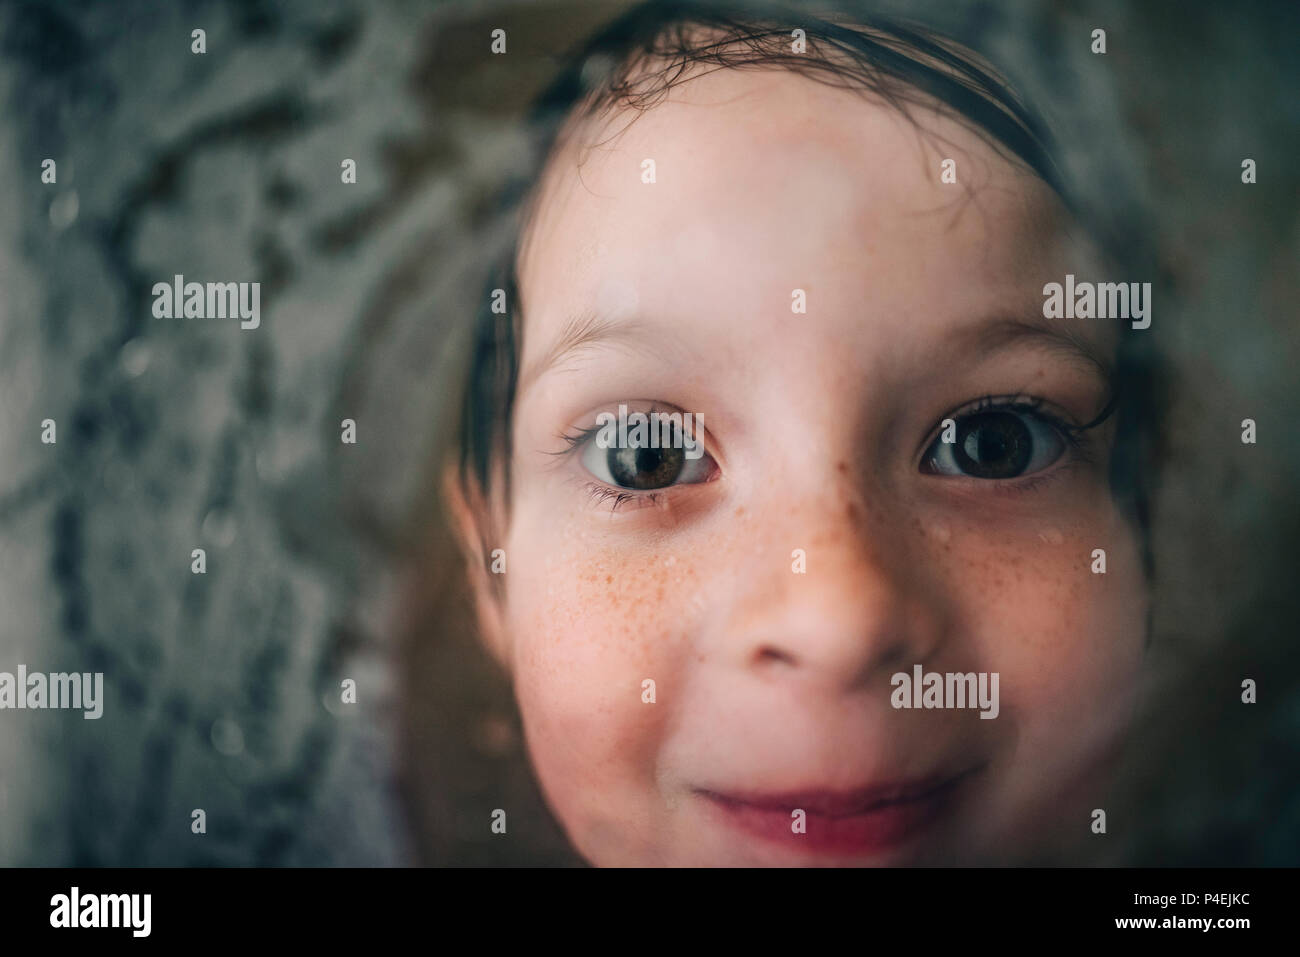 Portrait of a smiling girl looking through wet shower glass Stock Photo